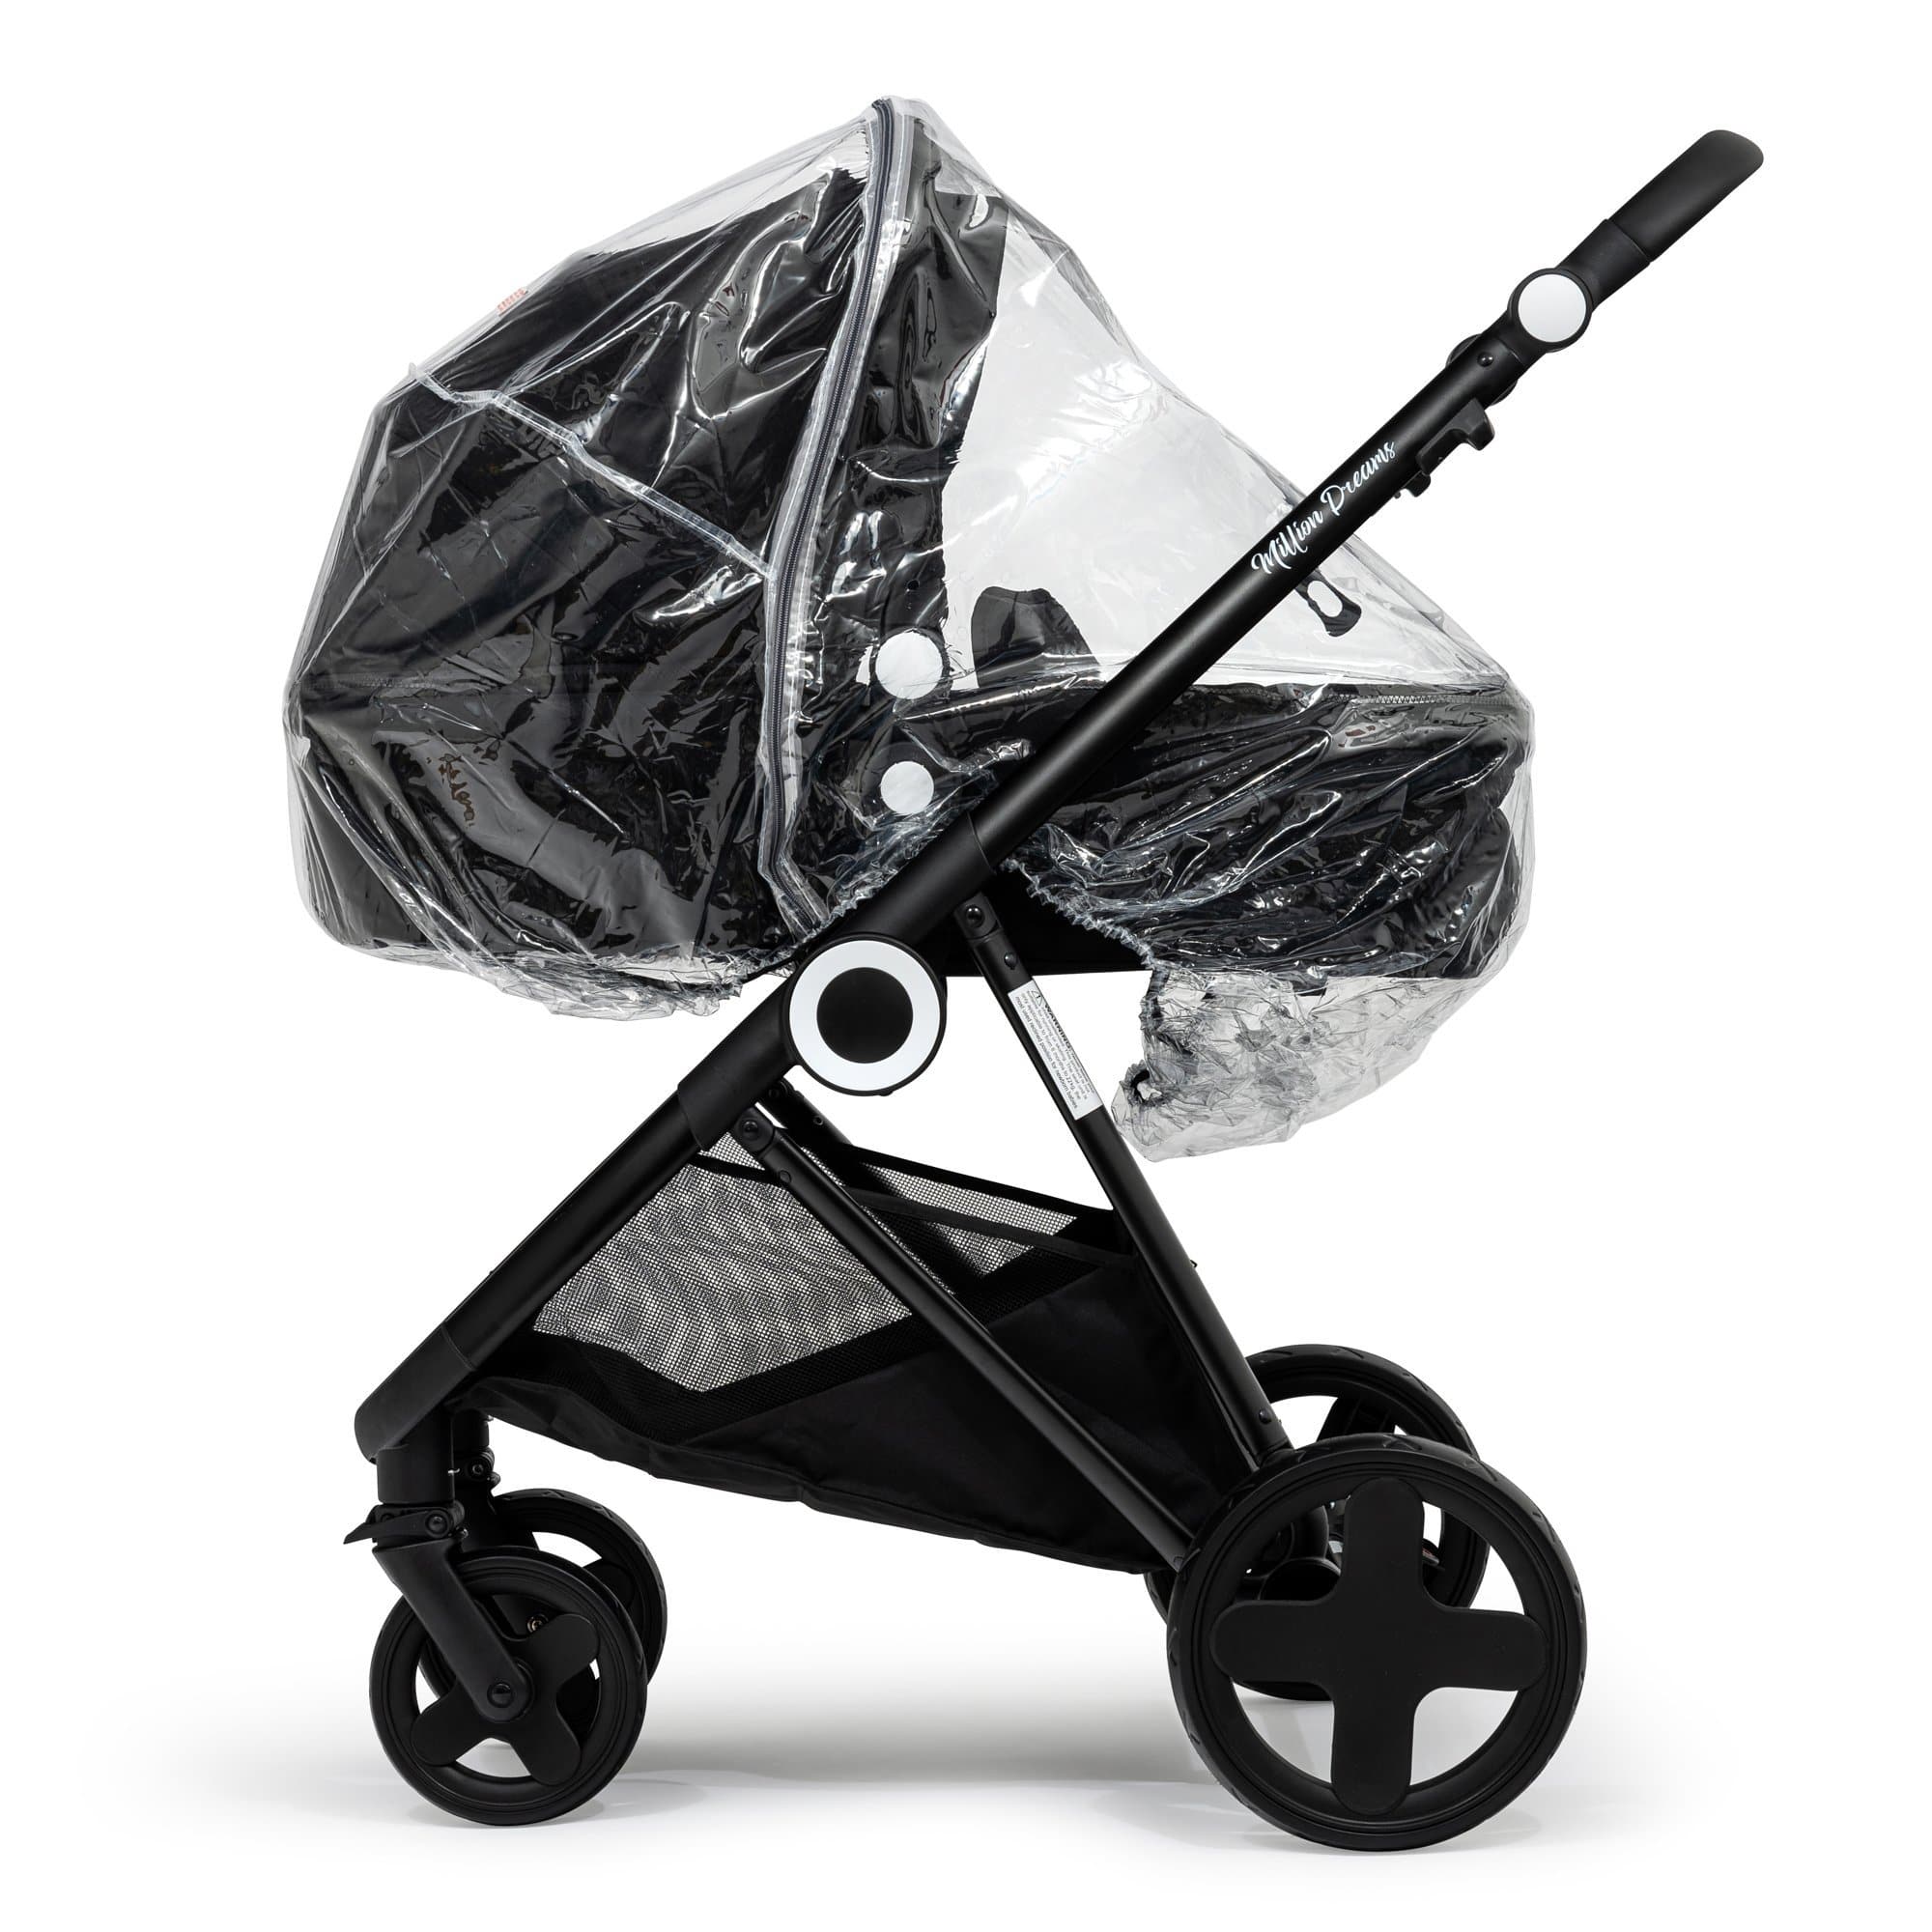 2 in 1 Rain Cover Compatible with Mothercare - Fits All Models - For Your Little One